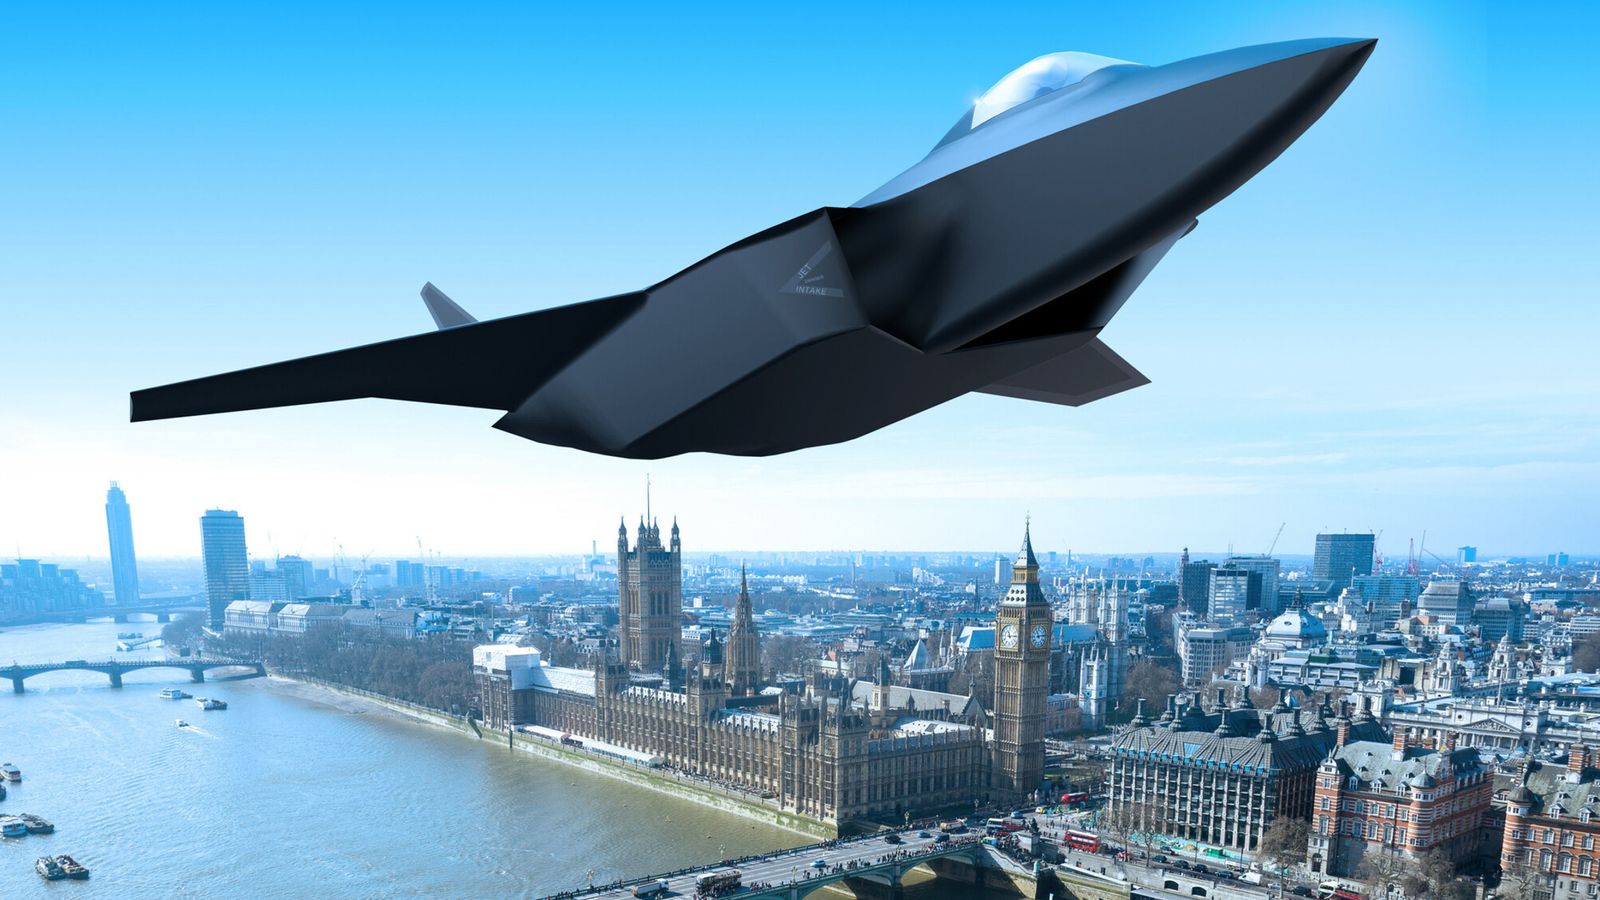 UK signs deal with Japan and Italy to build next generation fighter jets in Britain